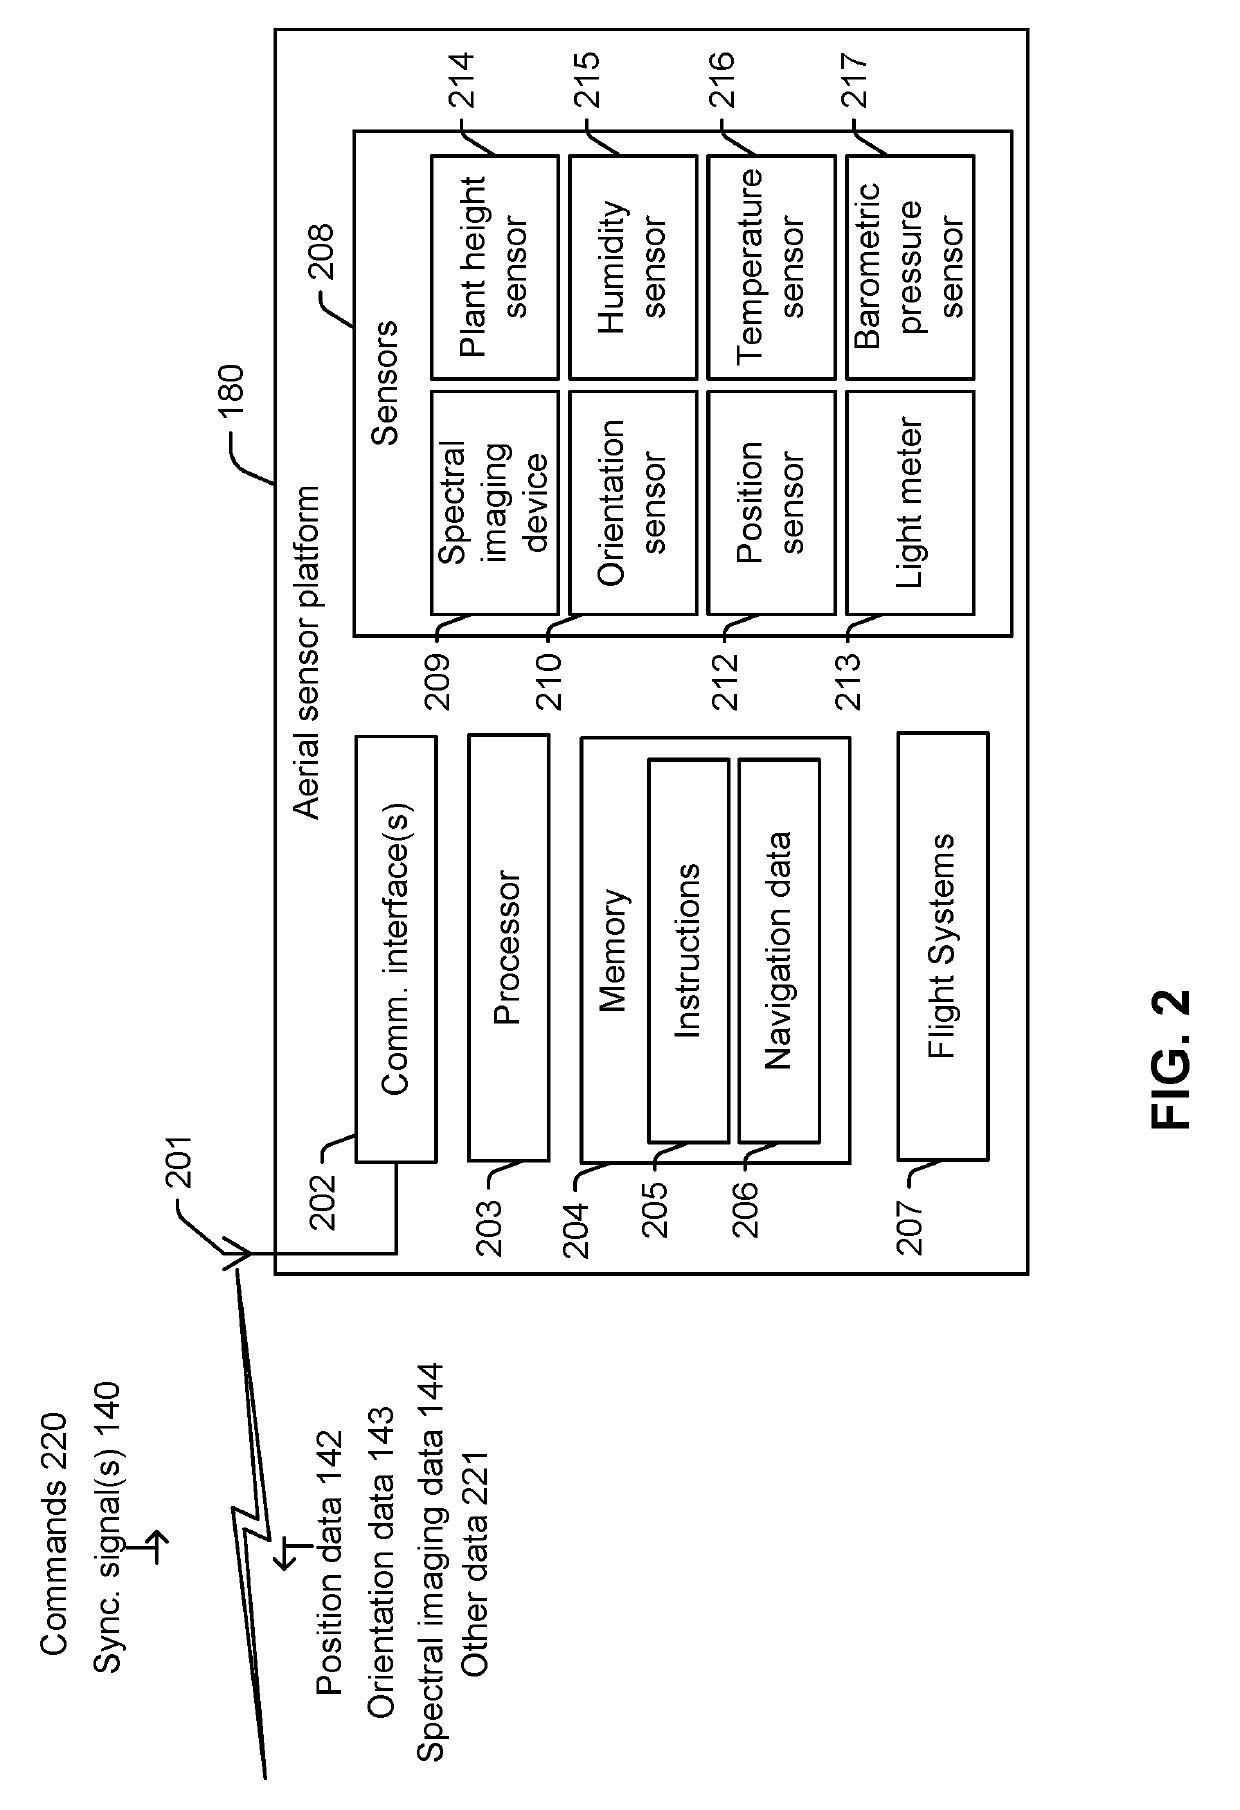 System and method for monitoring crops